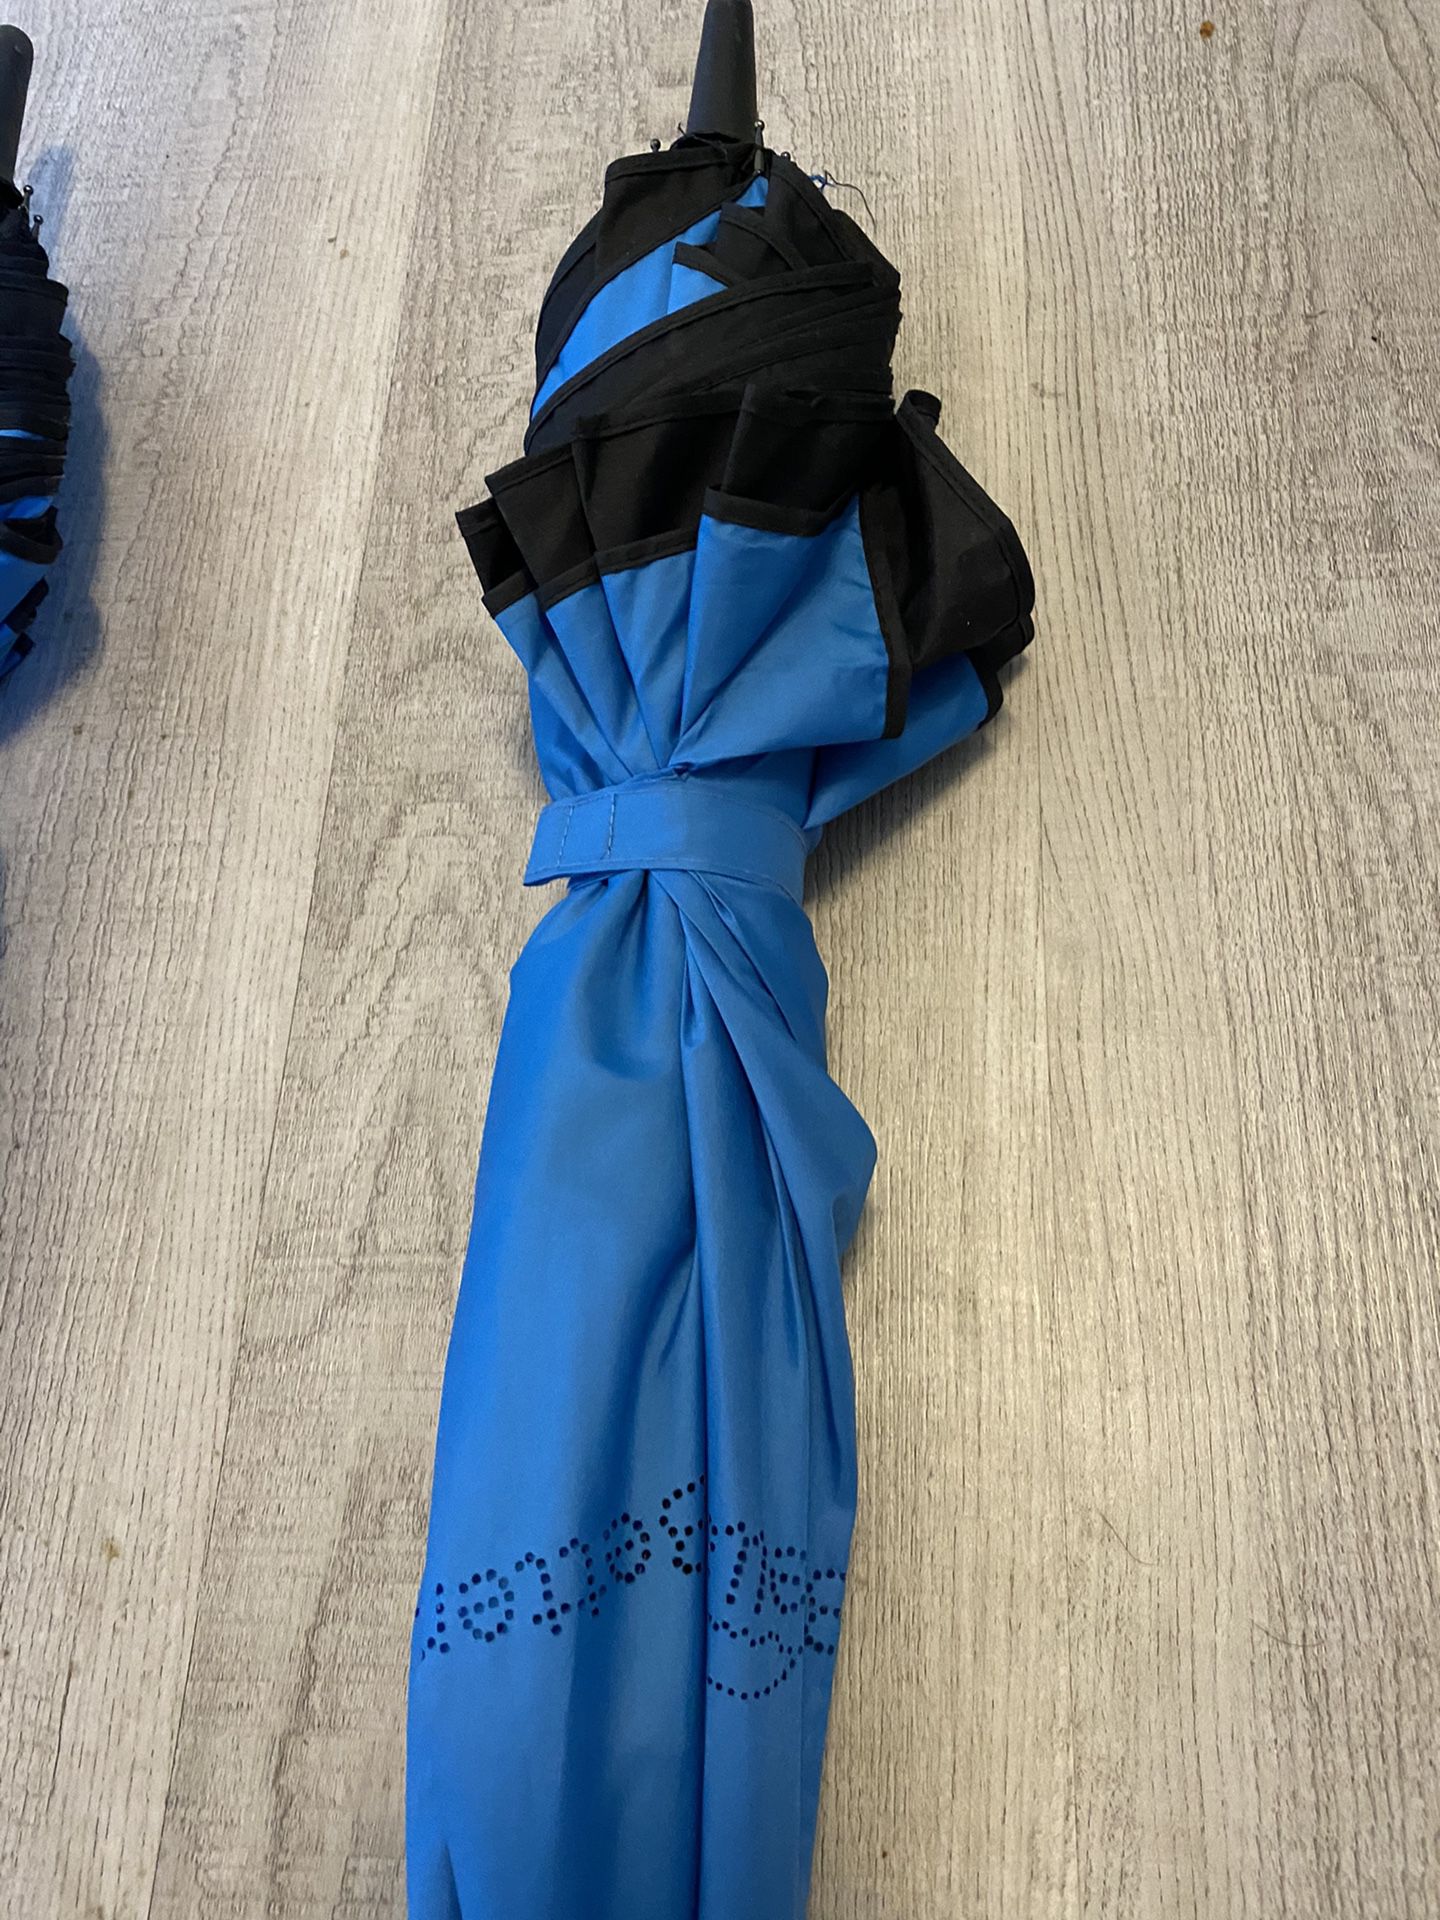 BETTERBRELLA Inverted Umbrella Windproof, Waterproof, Compact and Reverse Folding for car